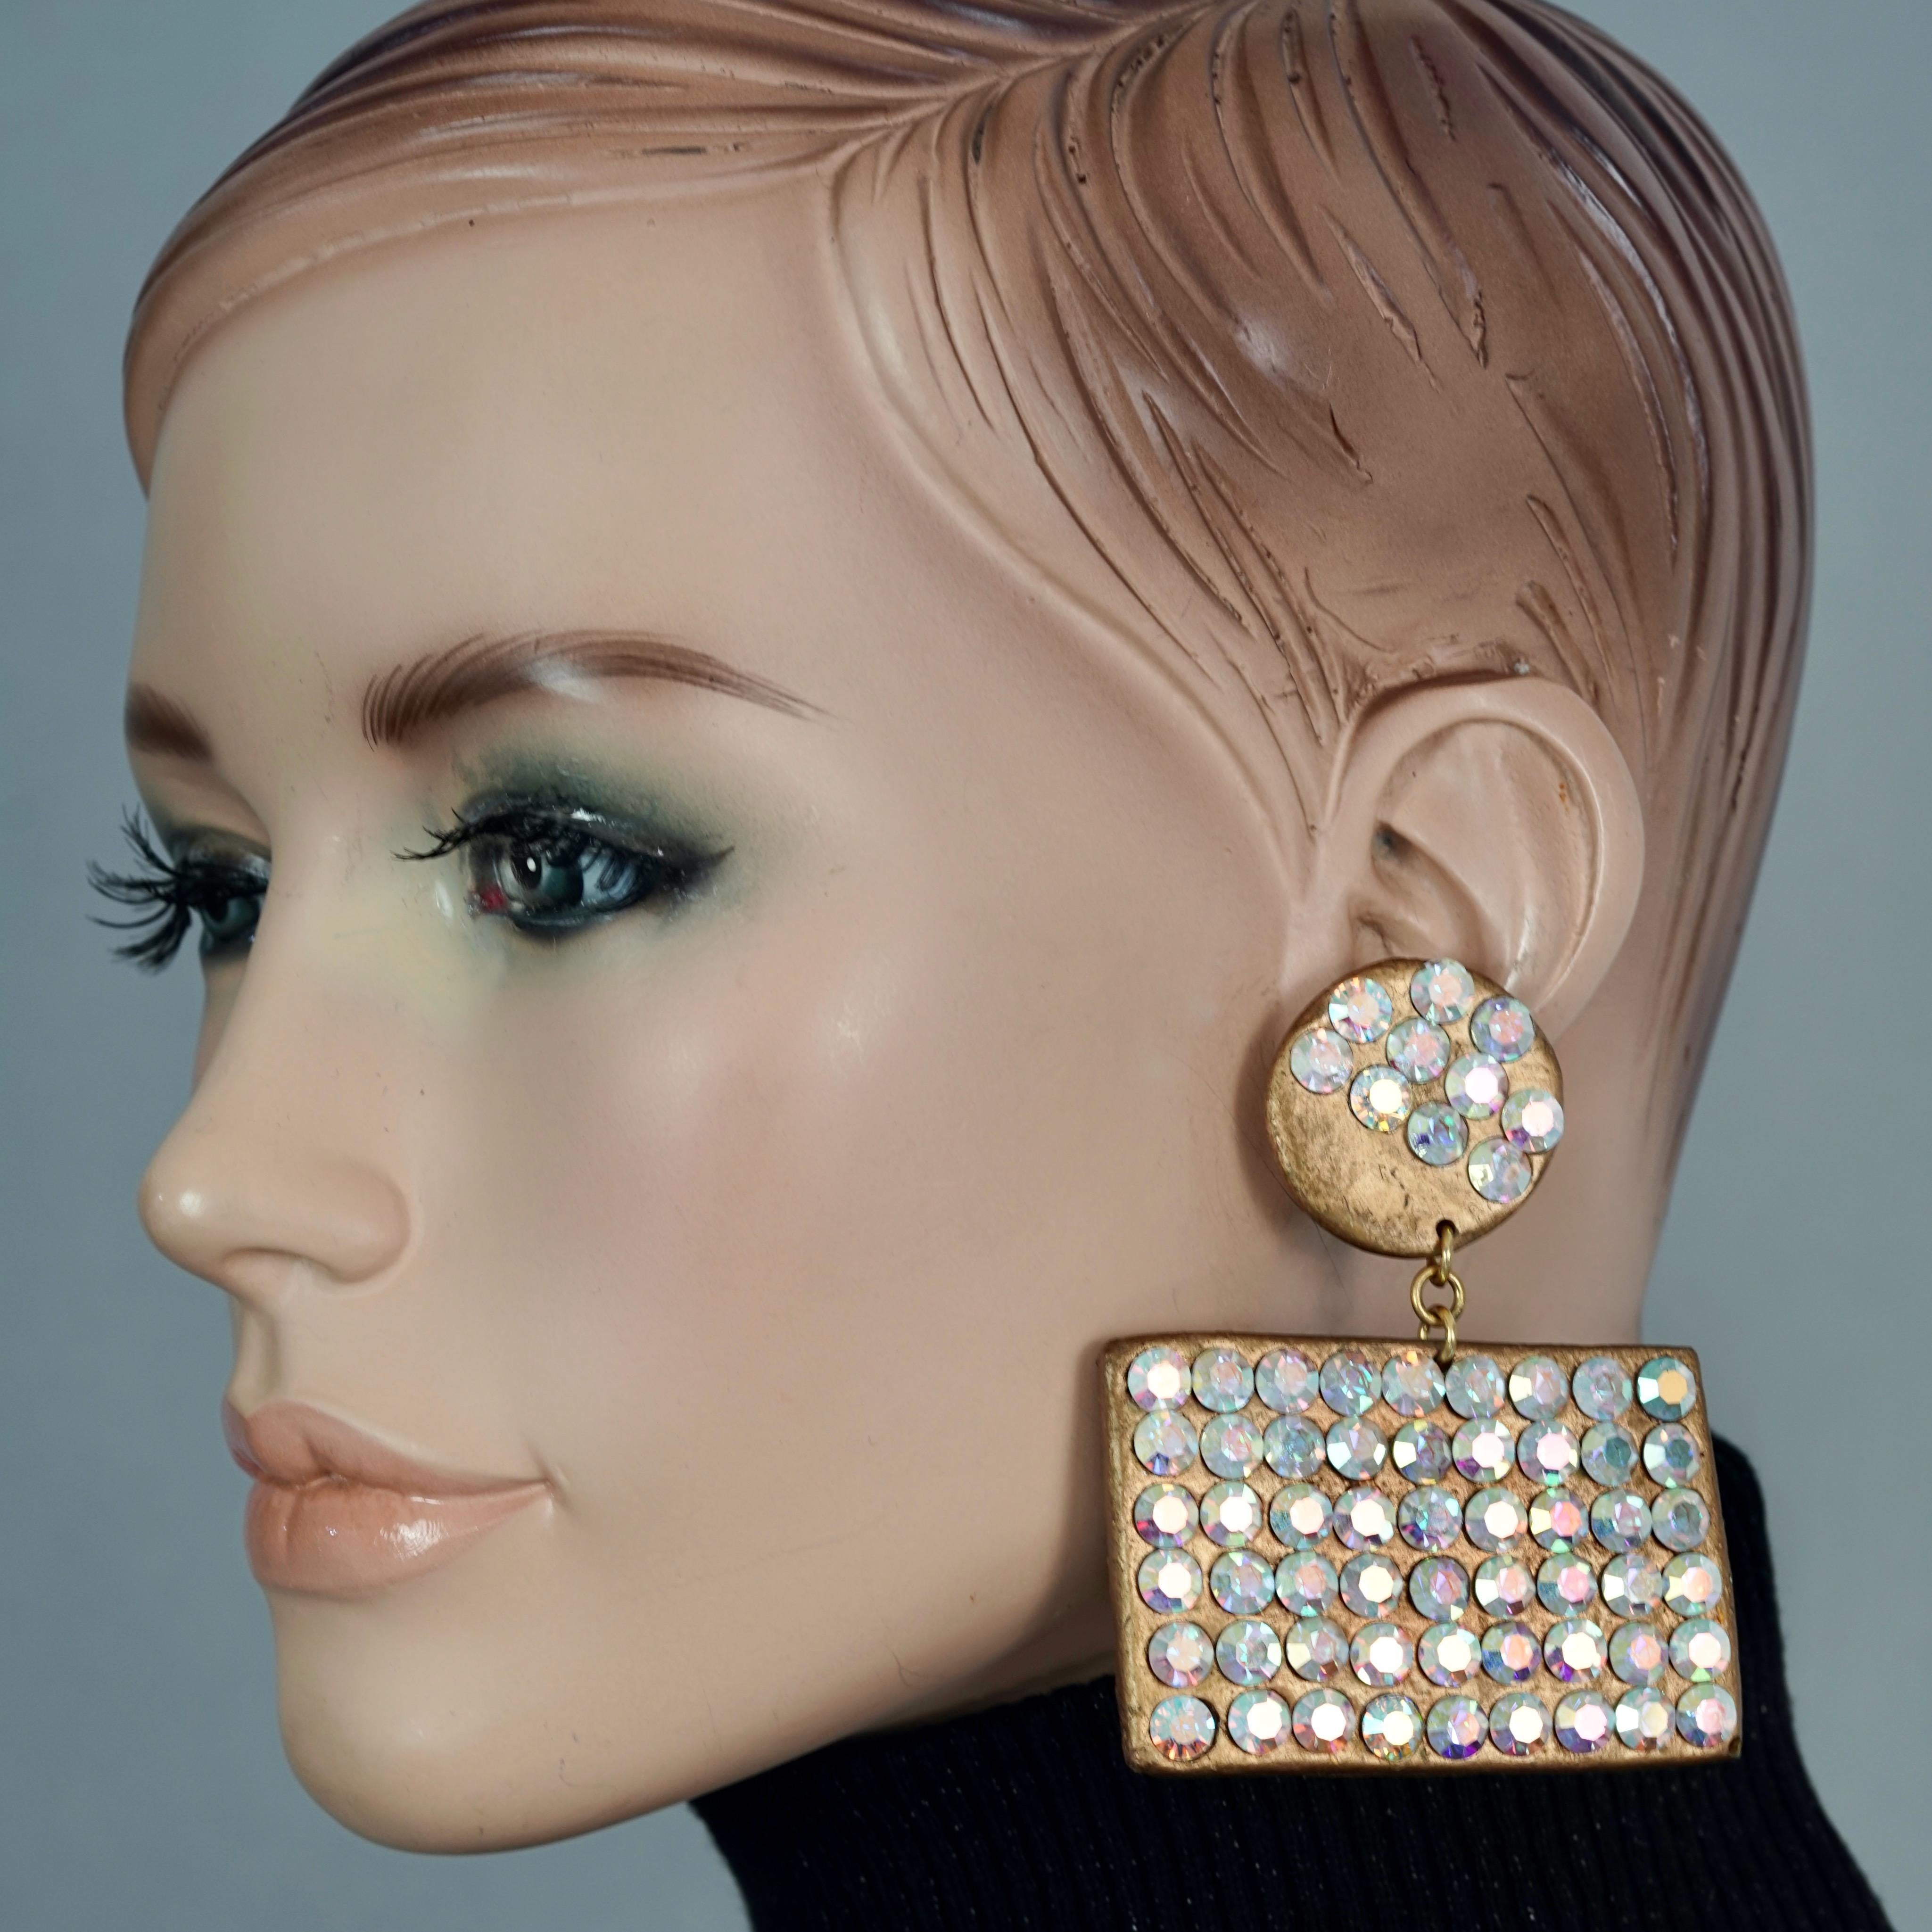 Vintage BILLY BOY SURREAL Bijoux Geometric Iridescent Crystal Dangling Earrings

Measurements:
Height: 3.07 inches (7.8 cm)
Width: 2.56 inches (6.5 cm)
Weight per Earring: 32 grams

Features:
- 100% Authentic BILLY BOY SURREAL BIJOUX.
- Massive